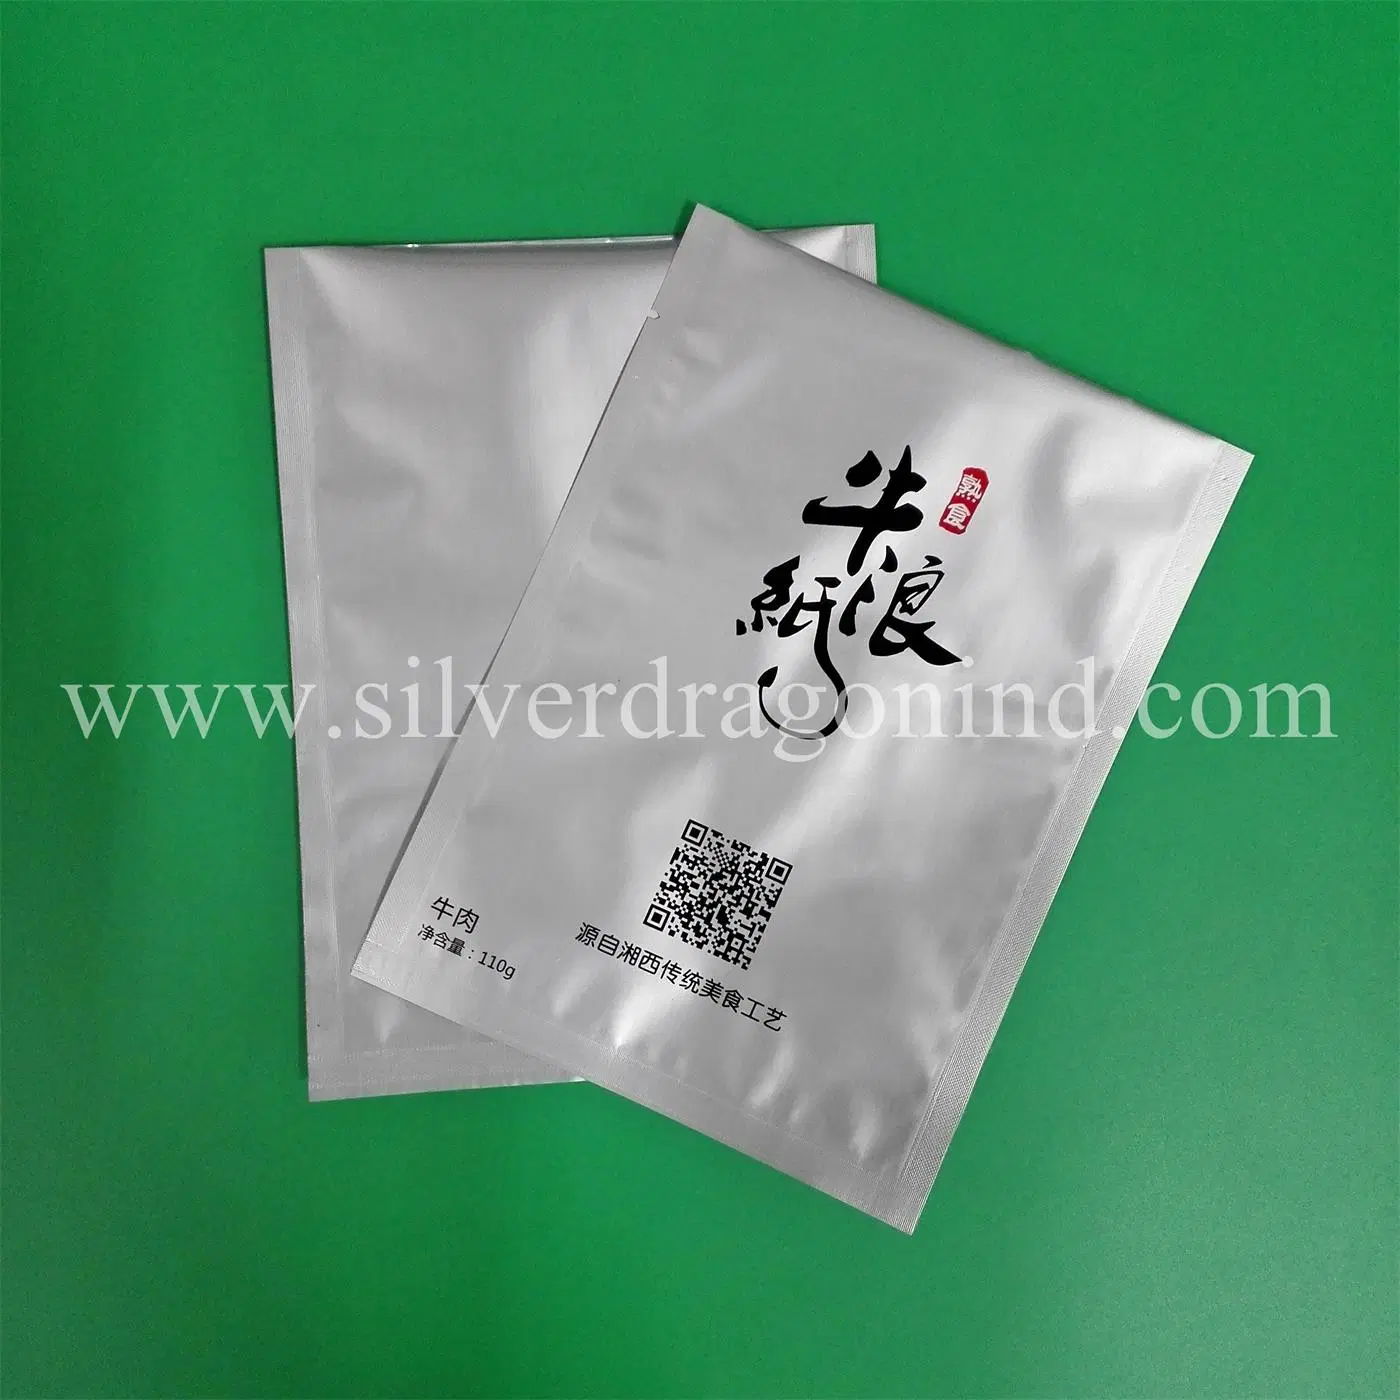 Aluminium Foil Bag for Drink and Food